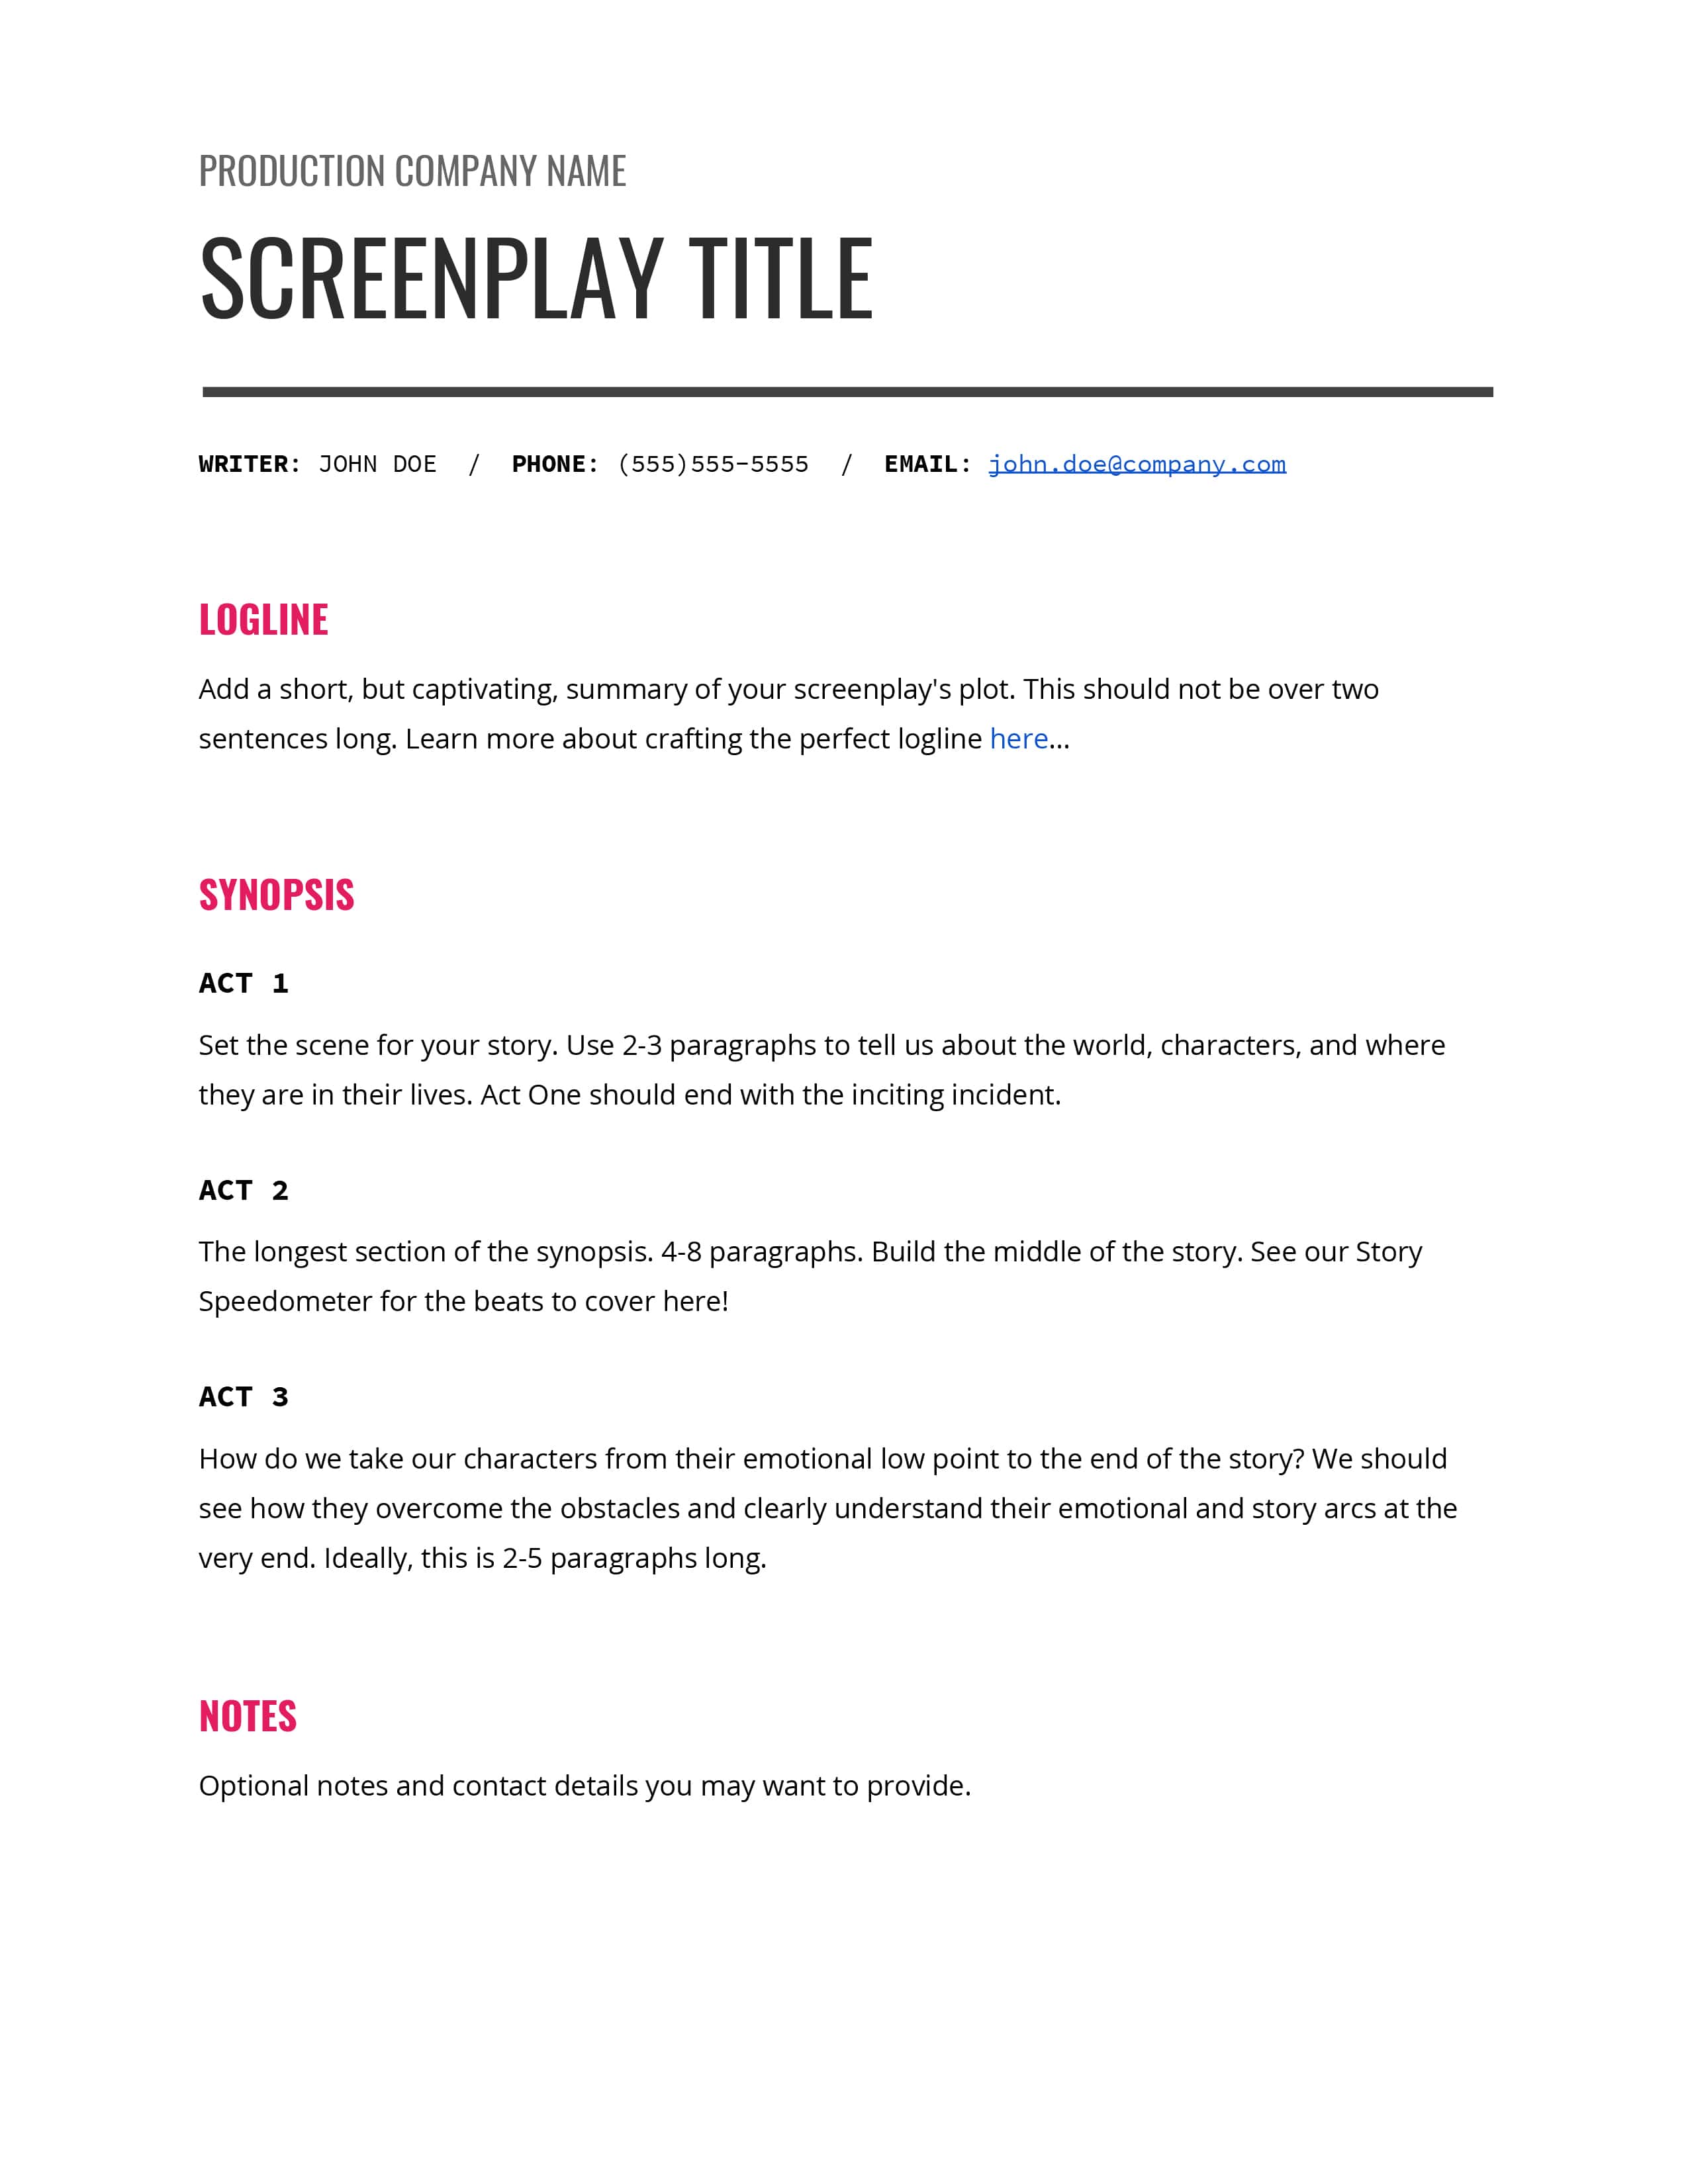 Movie Synopsis Template